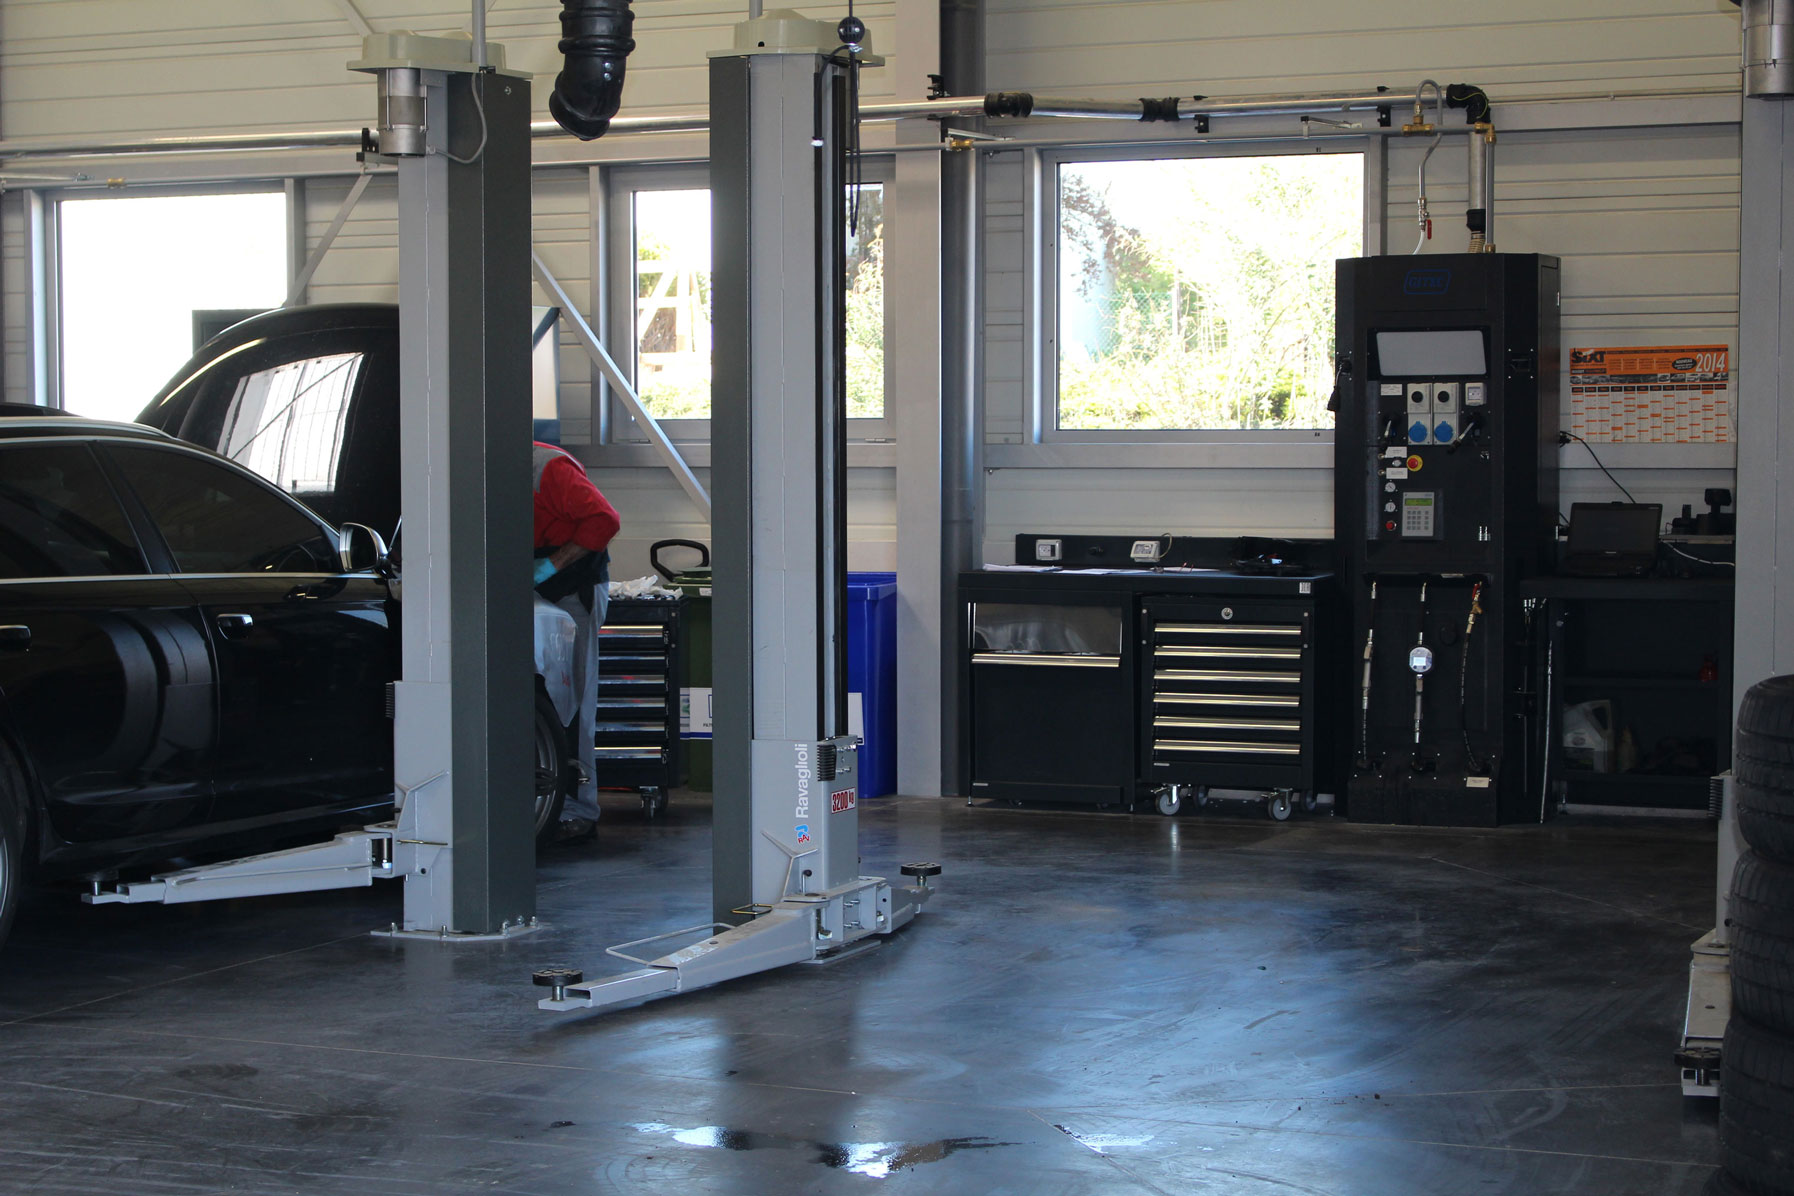 Ravaglioli grey 3.2 tons lift installed in a workshop fitted with mechanics' equipment